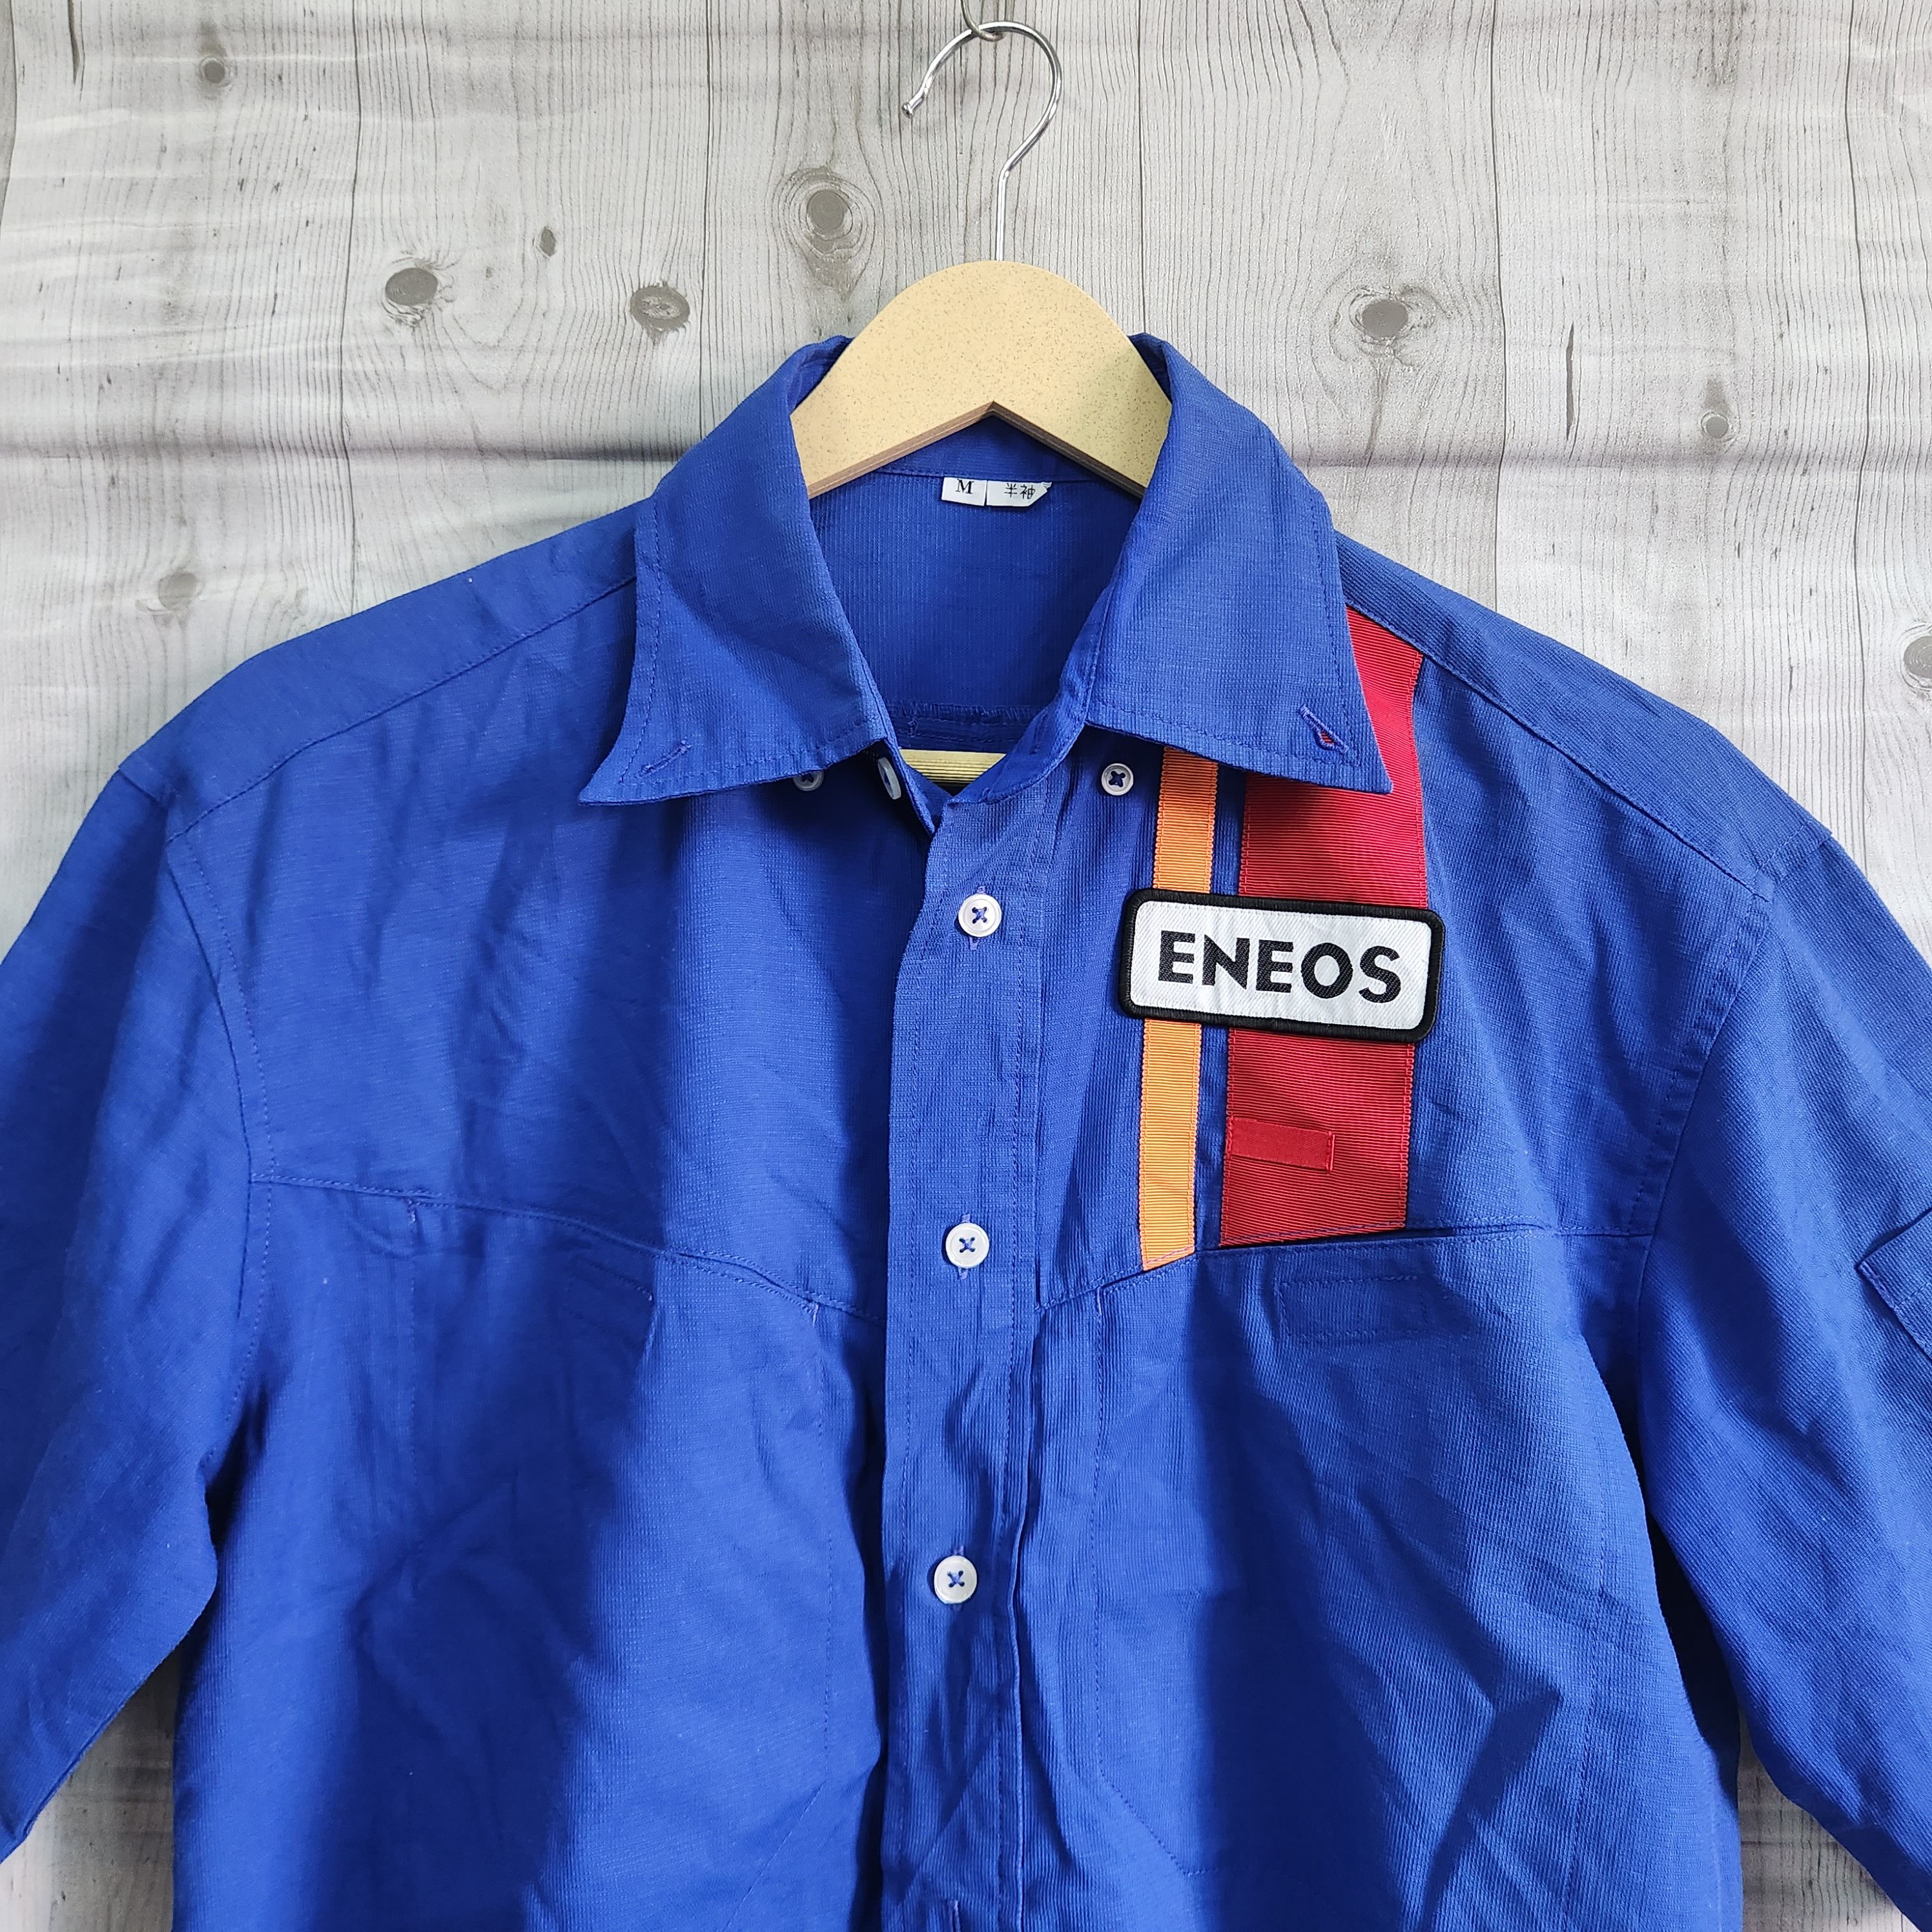 Vintage Japan ENEOS Workers Outlet Shirts - 4